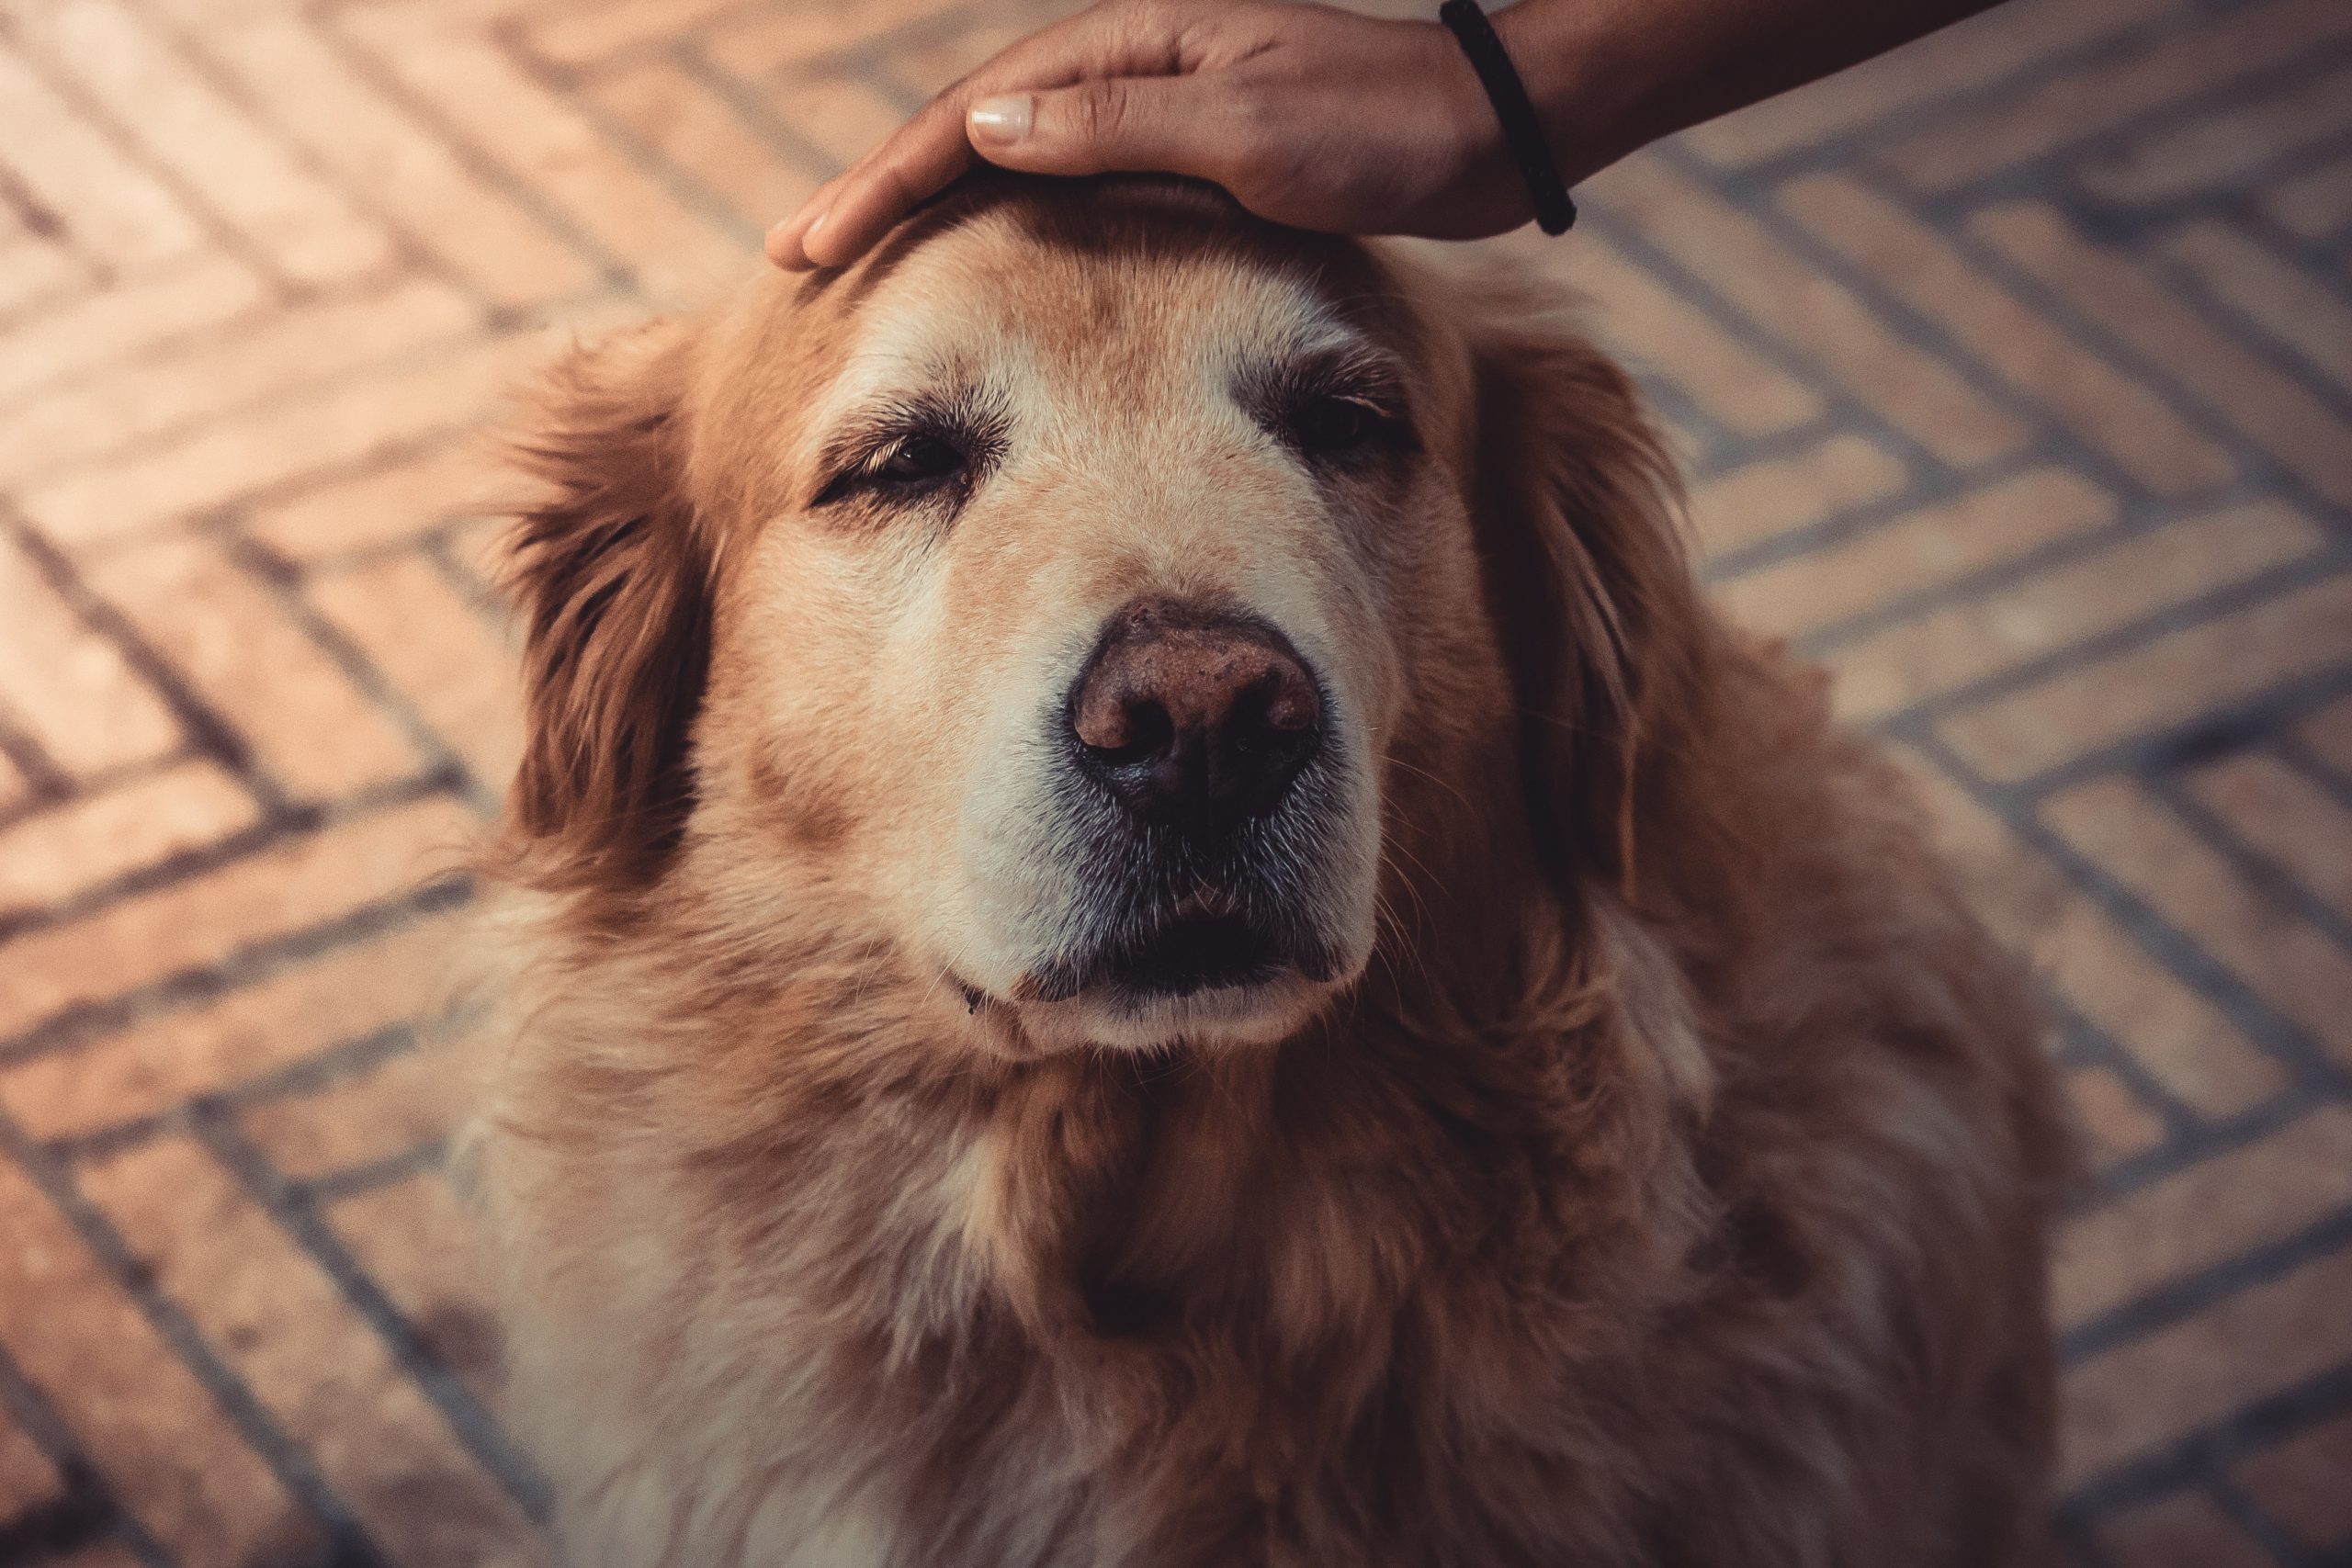 Grey-muzzled golden retriever with Caucasian hand petting top of head